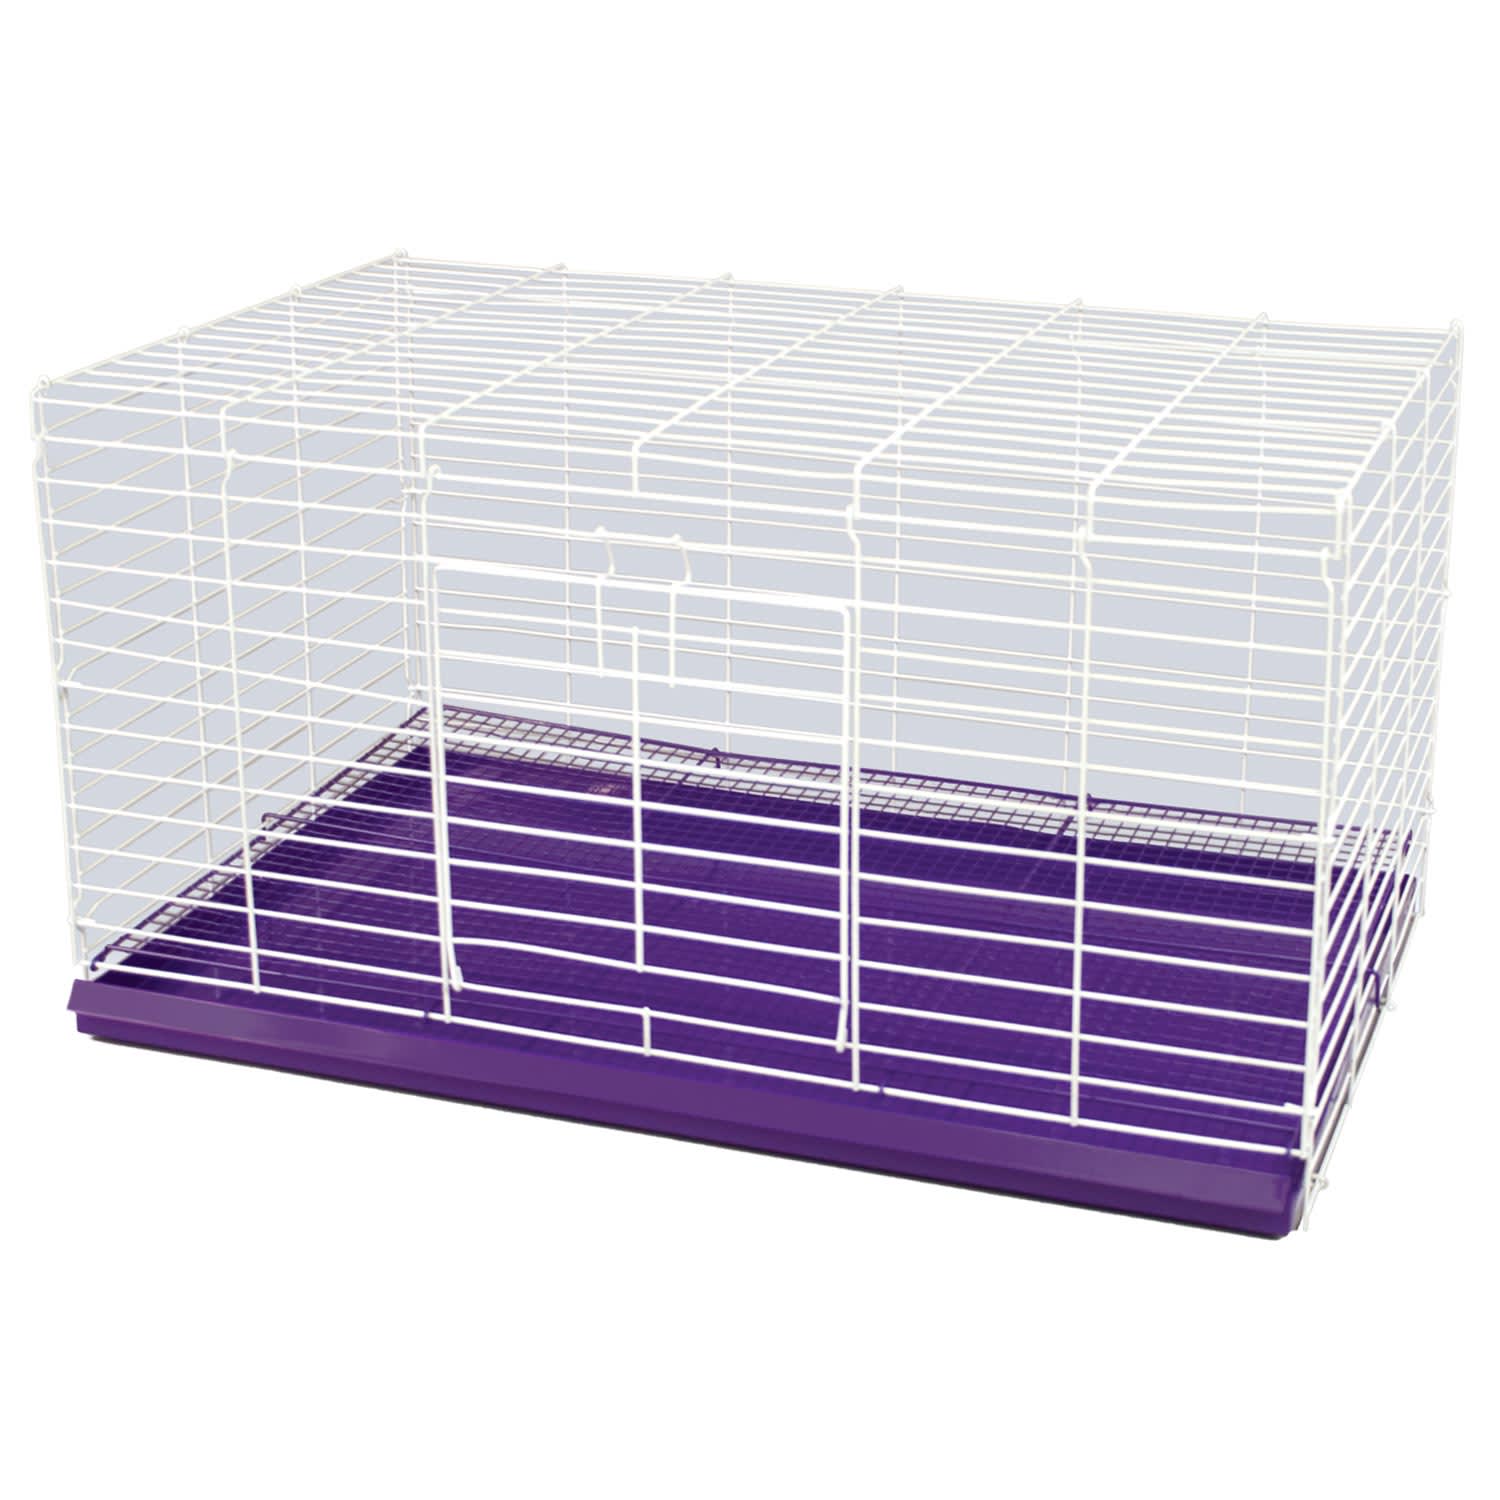 UPC 791611006825 product image for WARE Chew Proof Rabbit Cage, 18 IN, Purple | upcitemdb.com